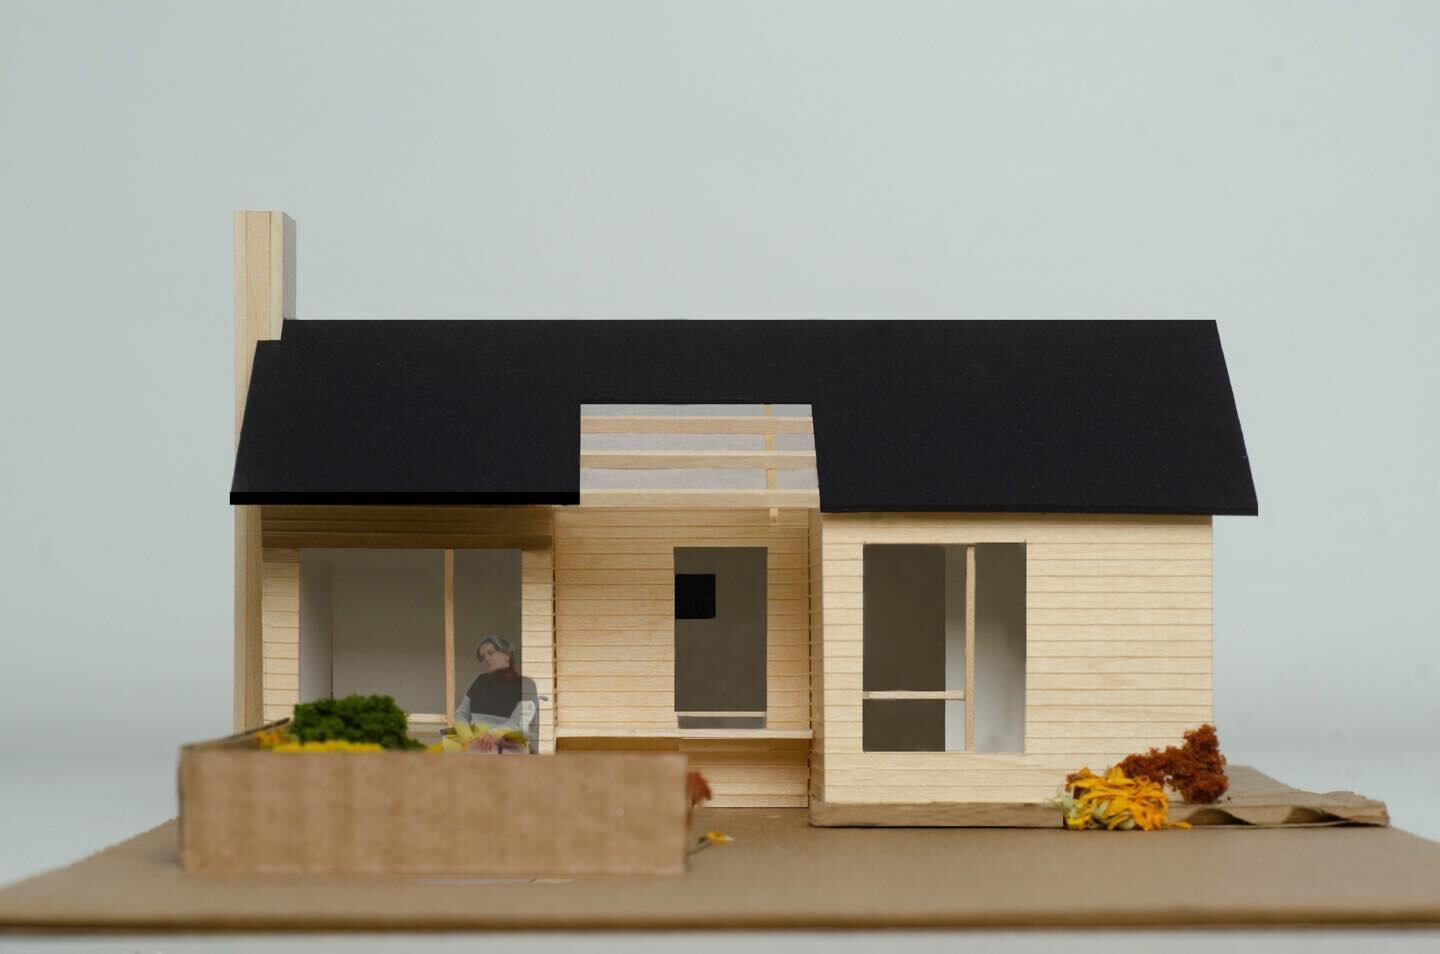 Our firm is working on a small modular accessible house that is under 400 s.f. #accessibility#small houses #folding millwork#Annapolis Valley#wood models